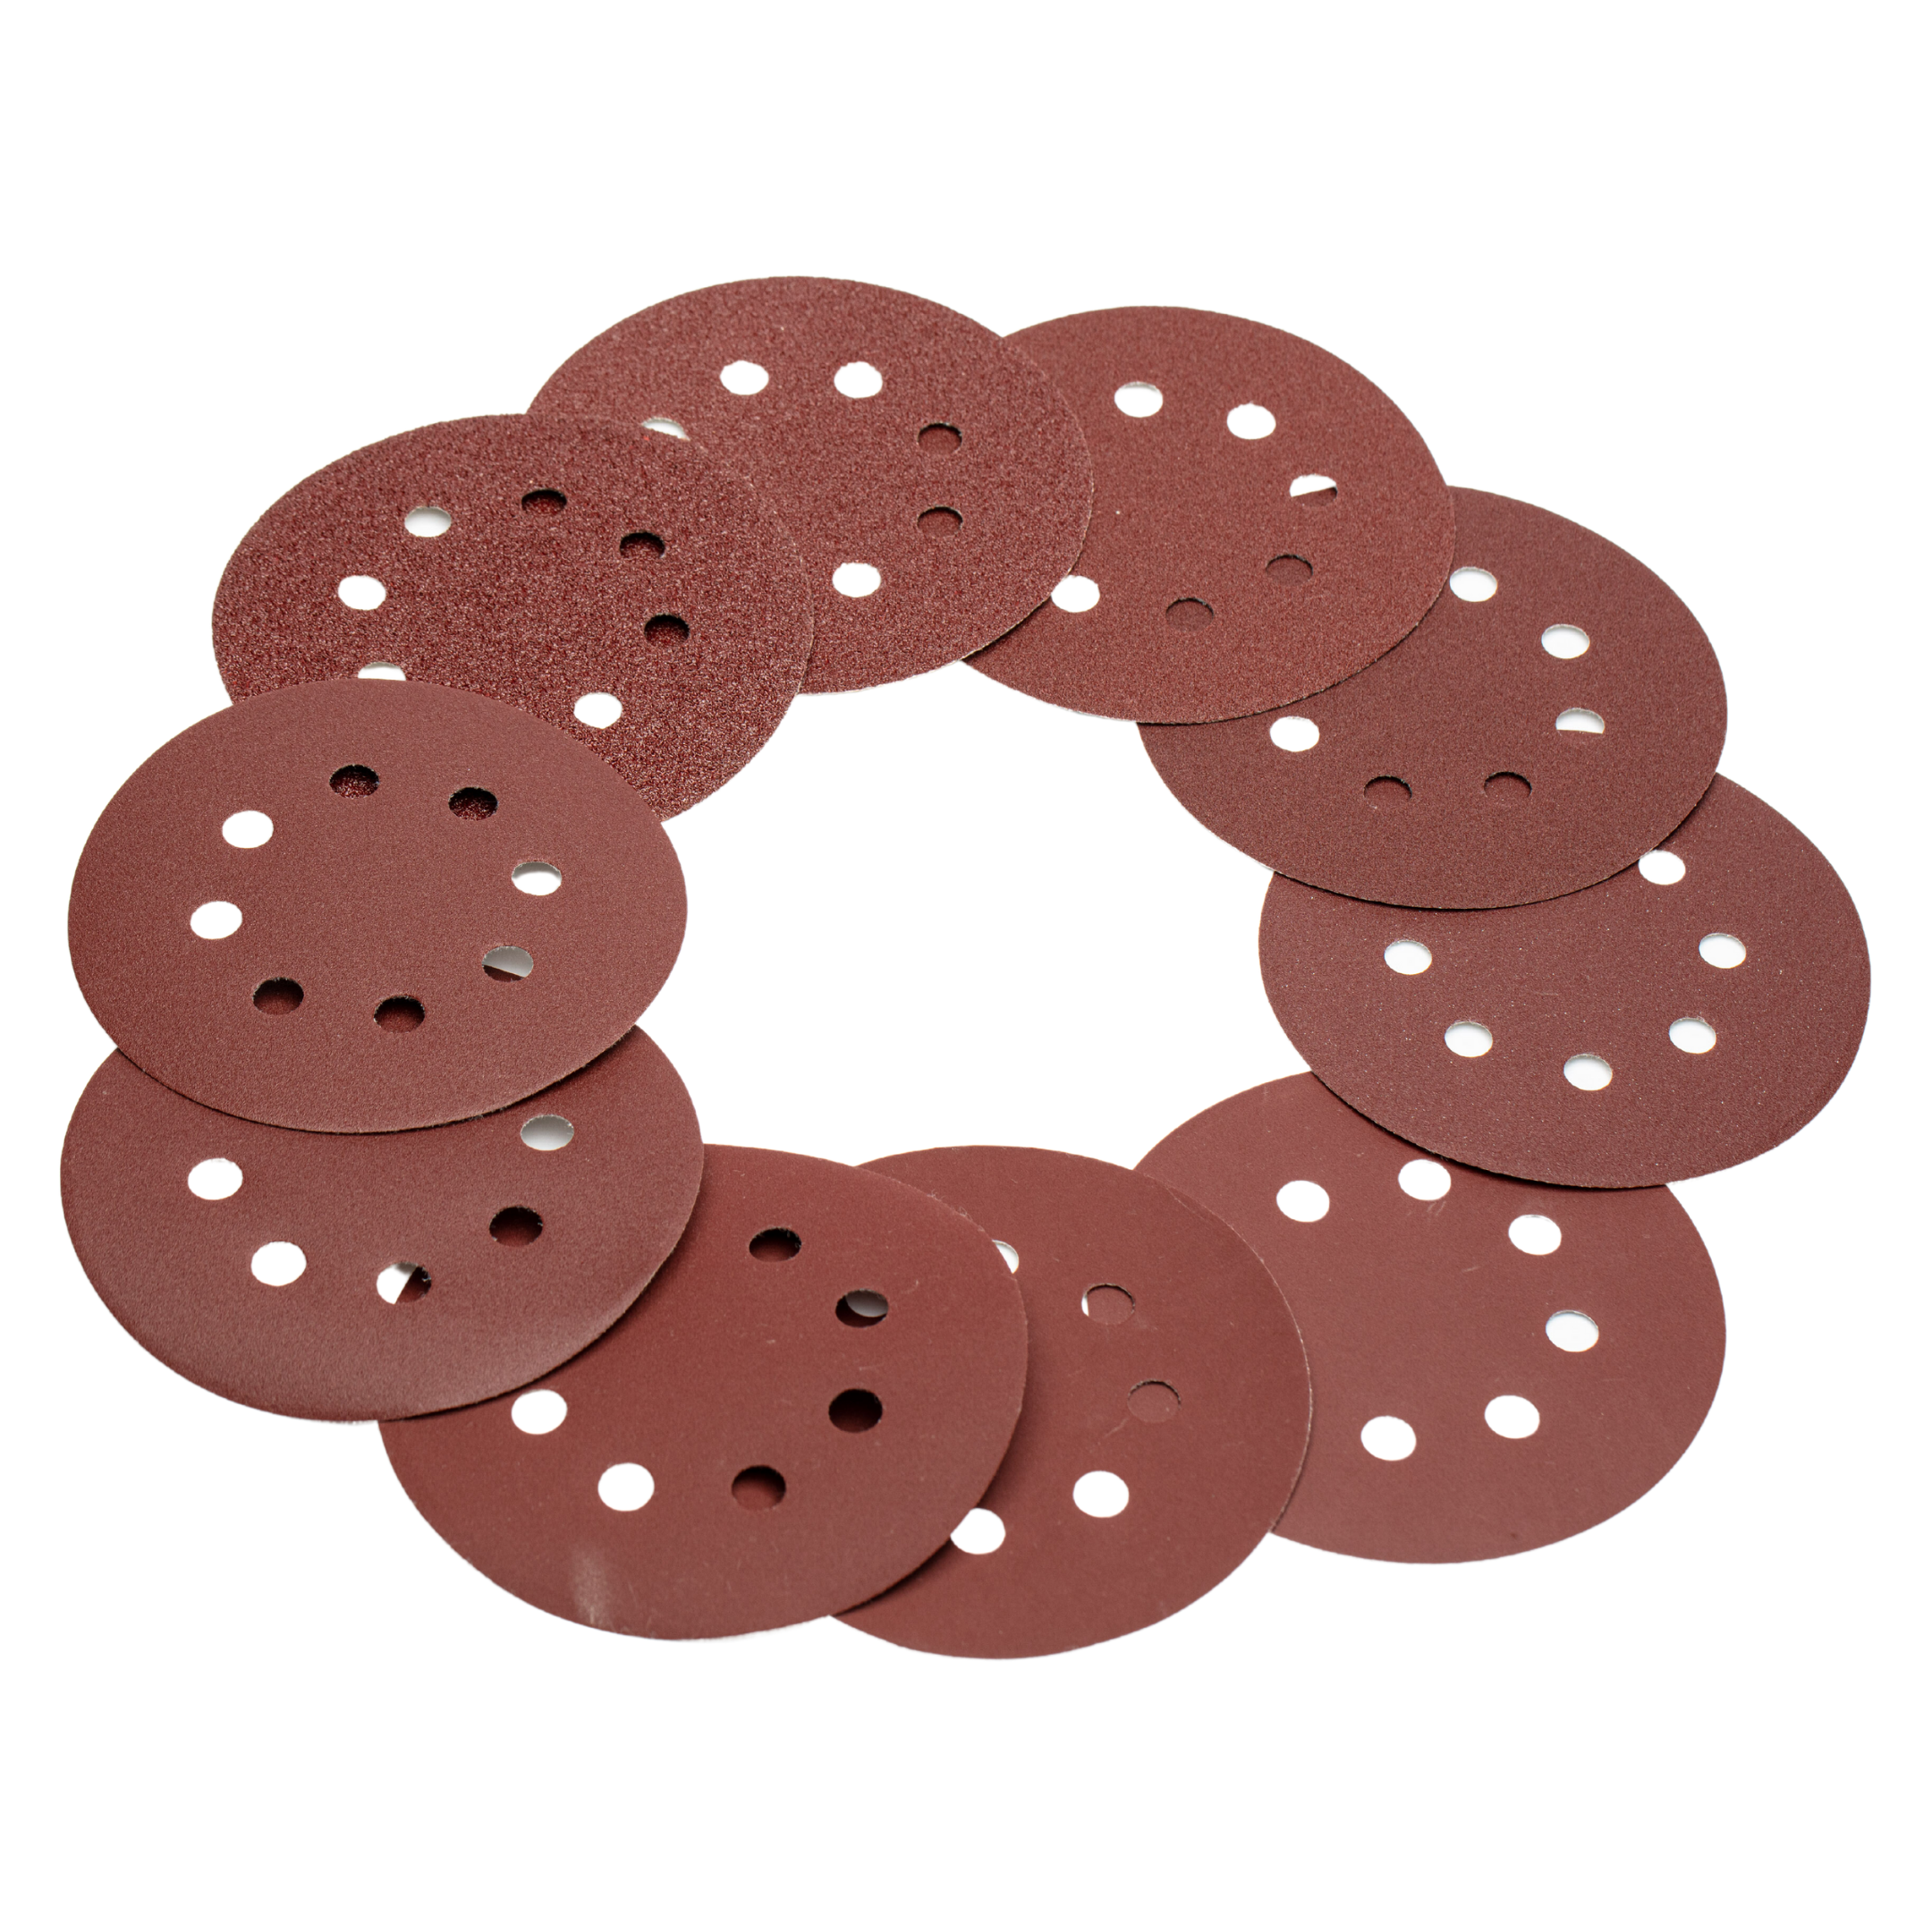 Replacement Adhesive Discs for Large Spot Magnets (30 Pack)